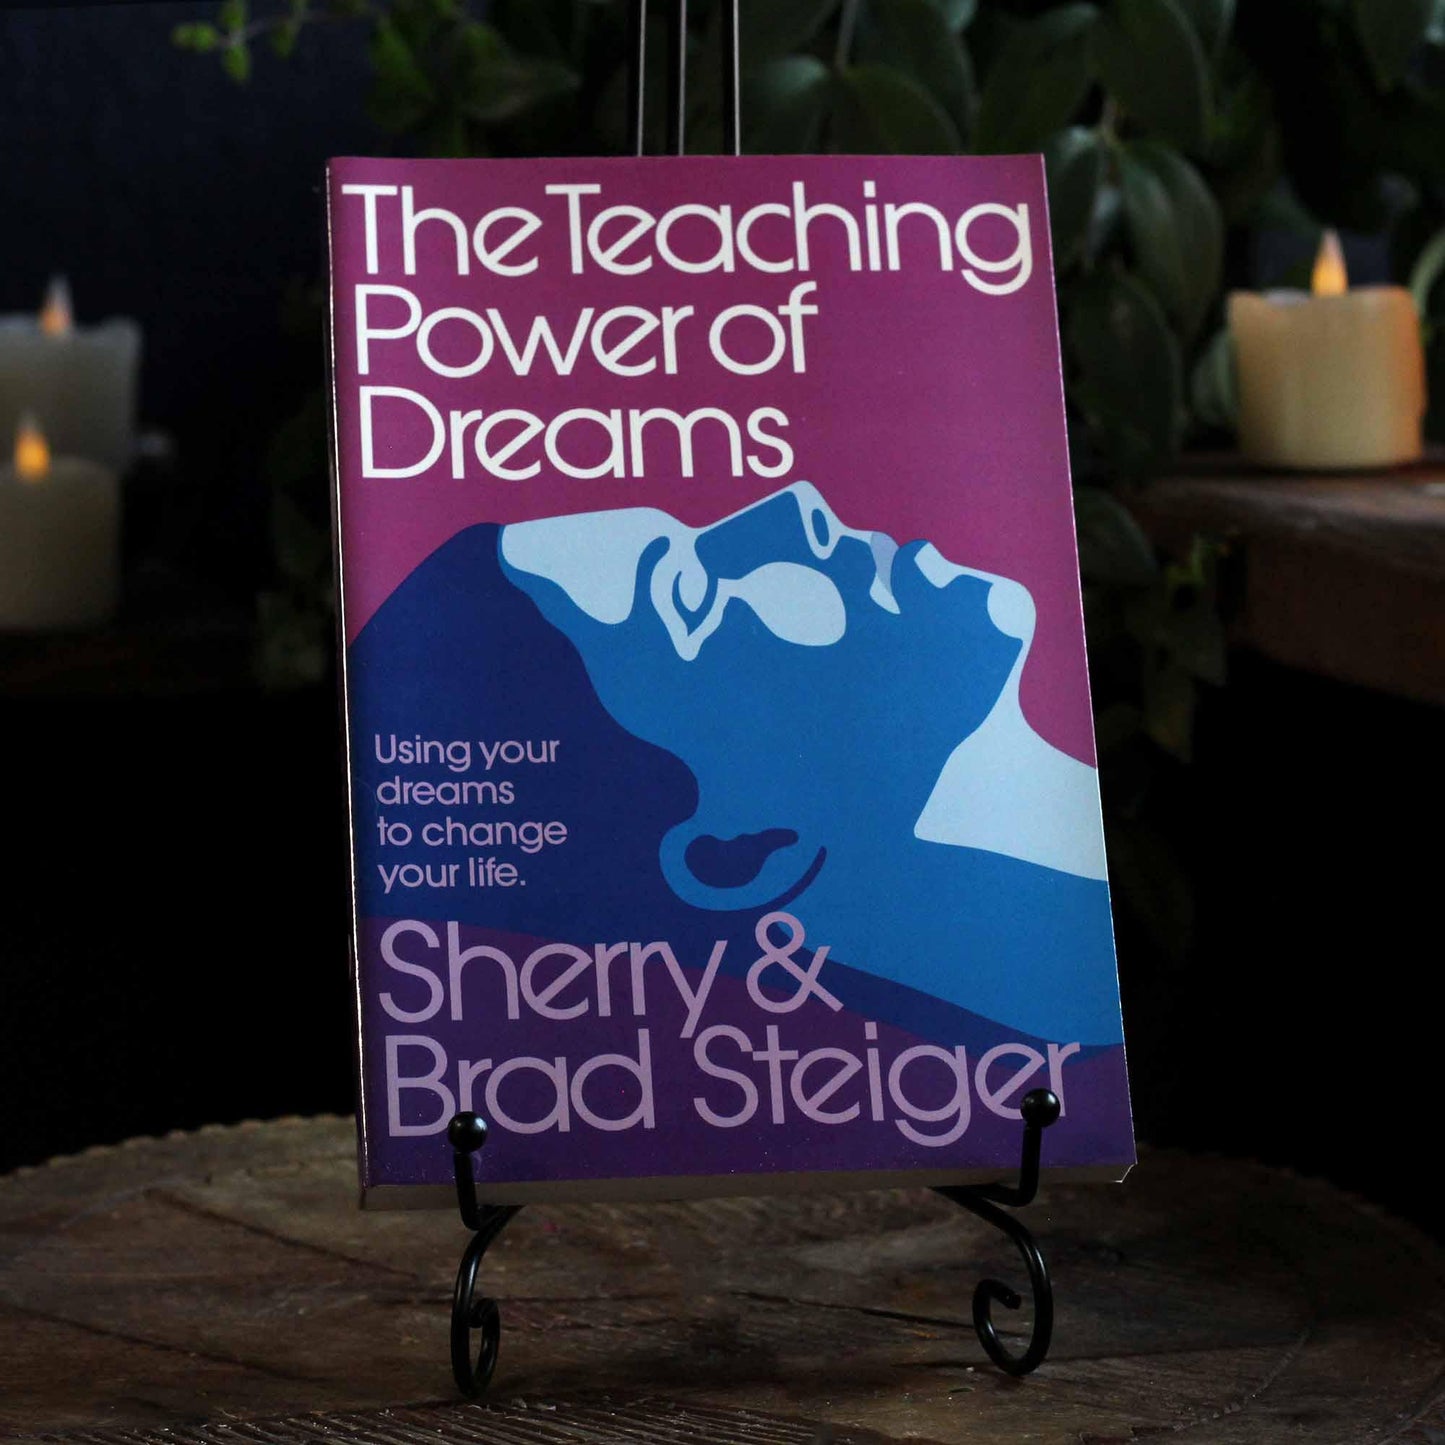 THE TEACHING POWER OF DREAMS